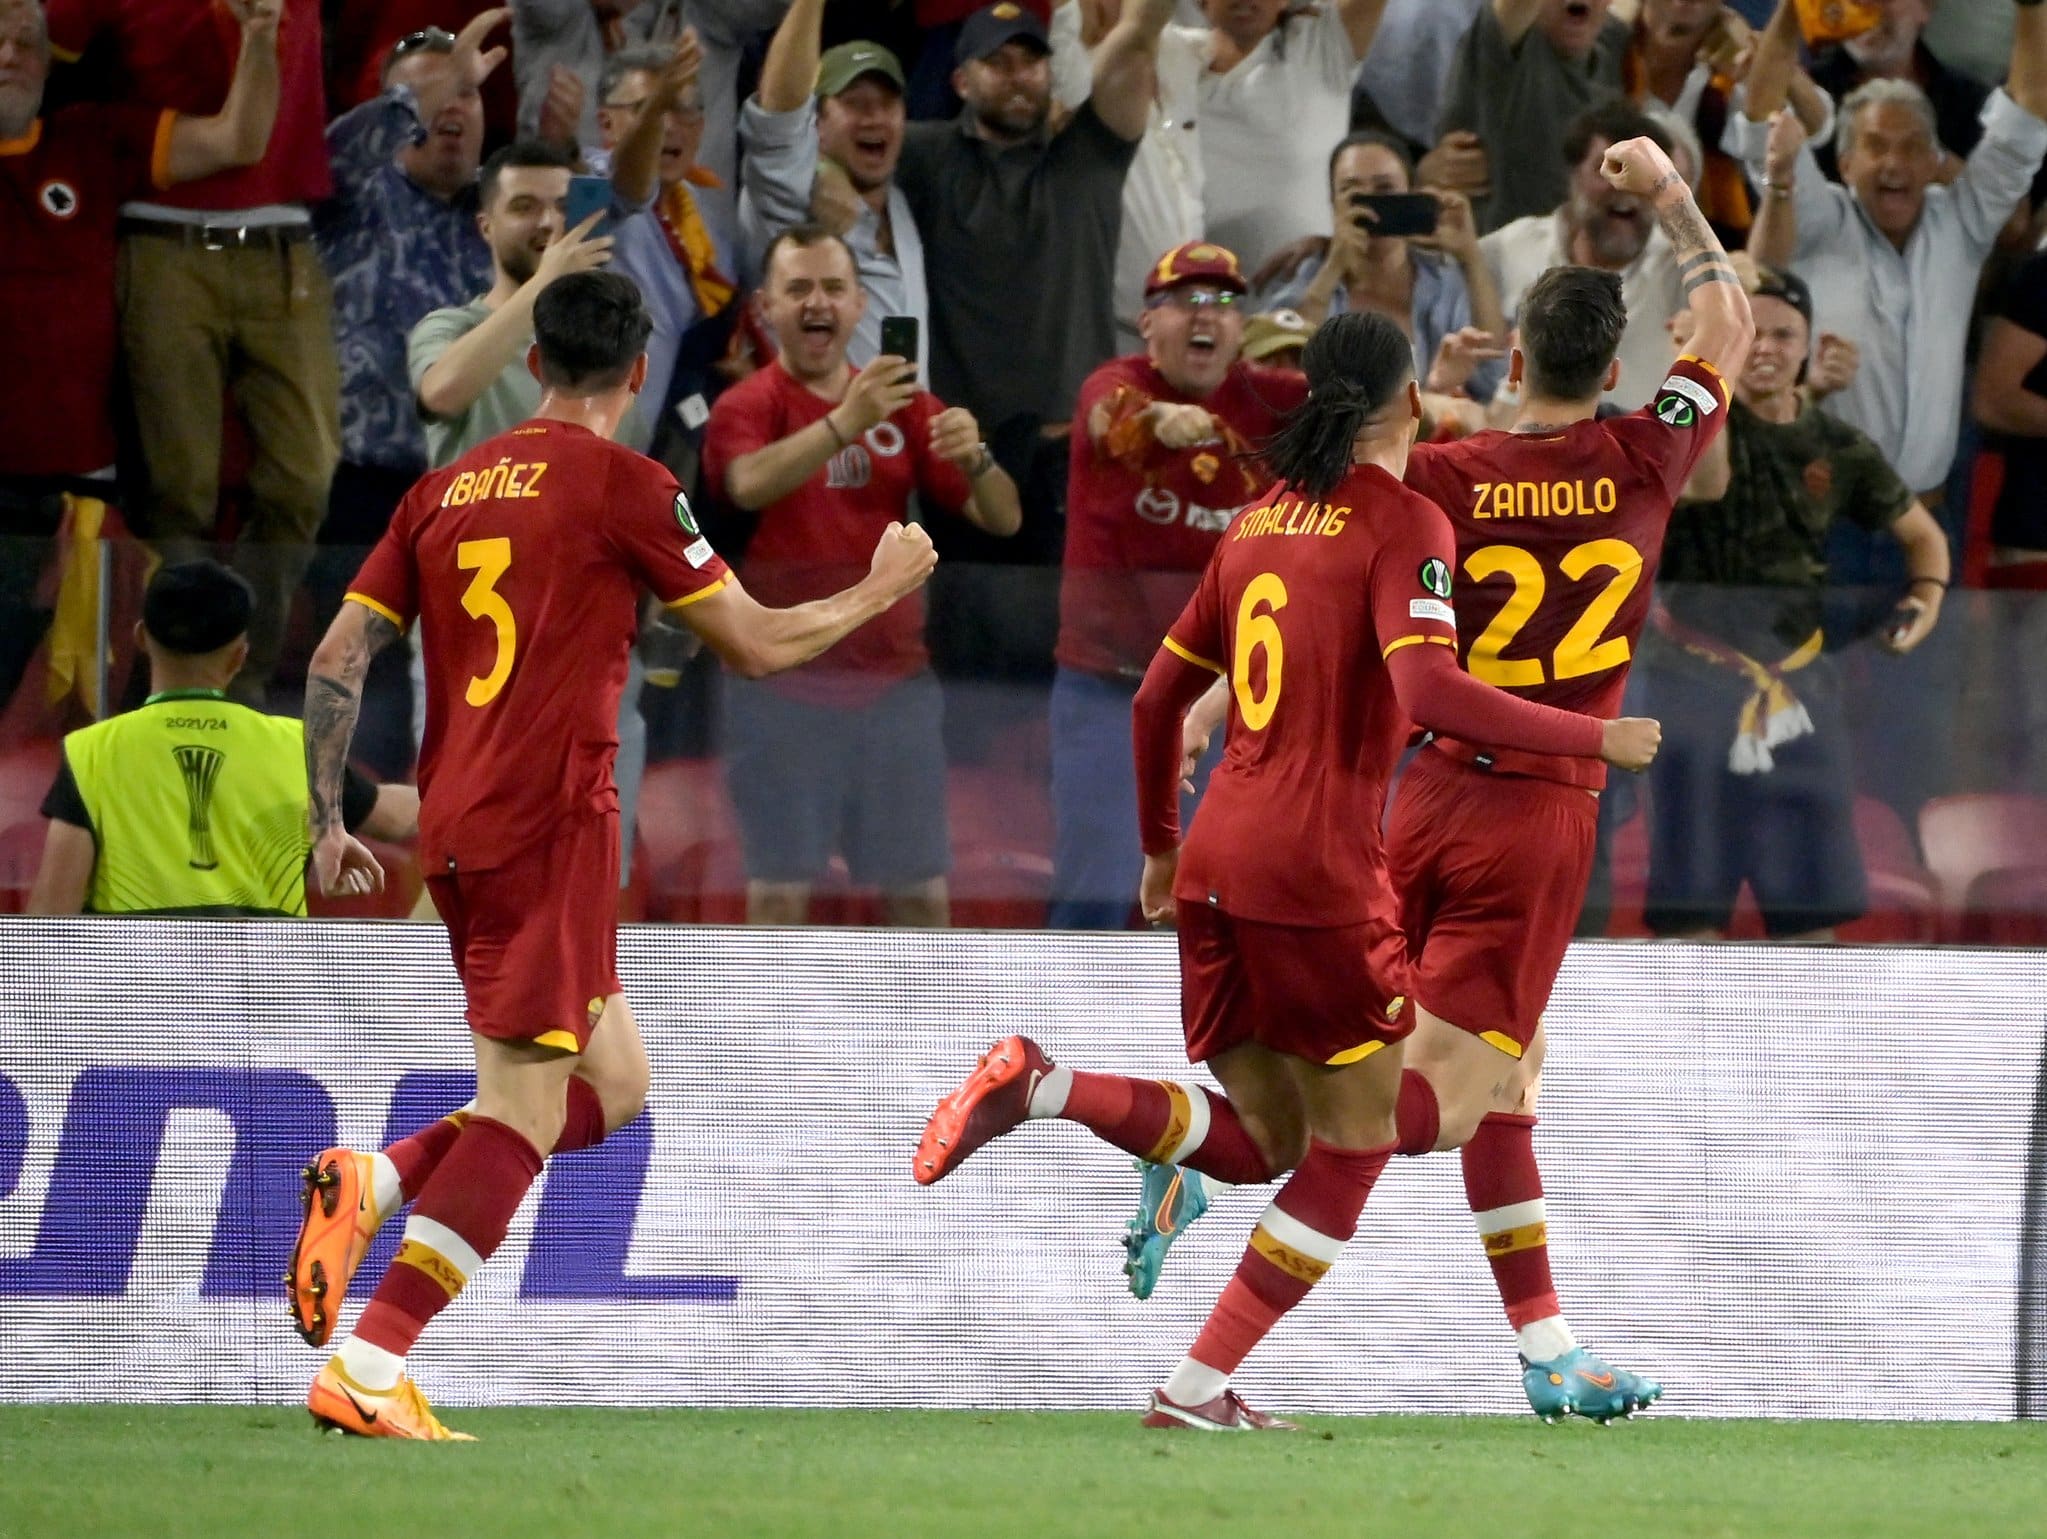 You are currently viewing Highlights: Zaniolo fires Roma to Conference League triumph over Feyenoord